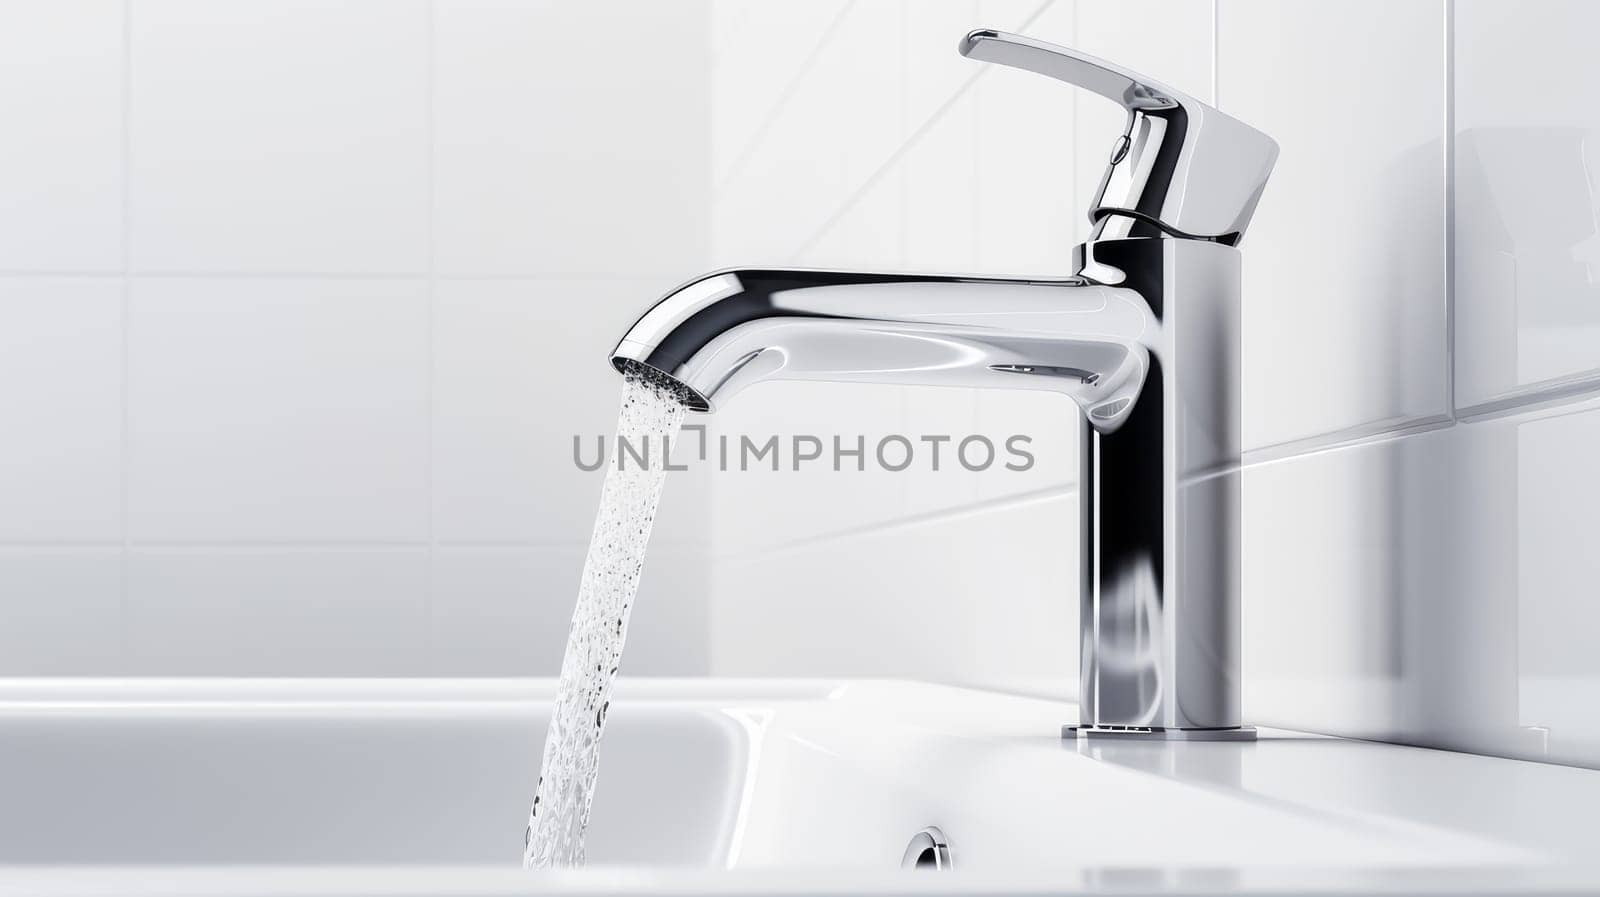 A faucet from which water flows on a white background. Water shortage on Earth due to global warming, drought, famine. Climate change, crisis environment, water crisis. Saving natural resources, planet suffers